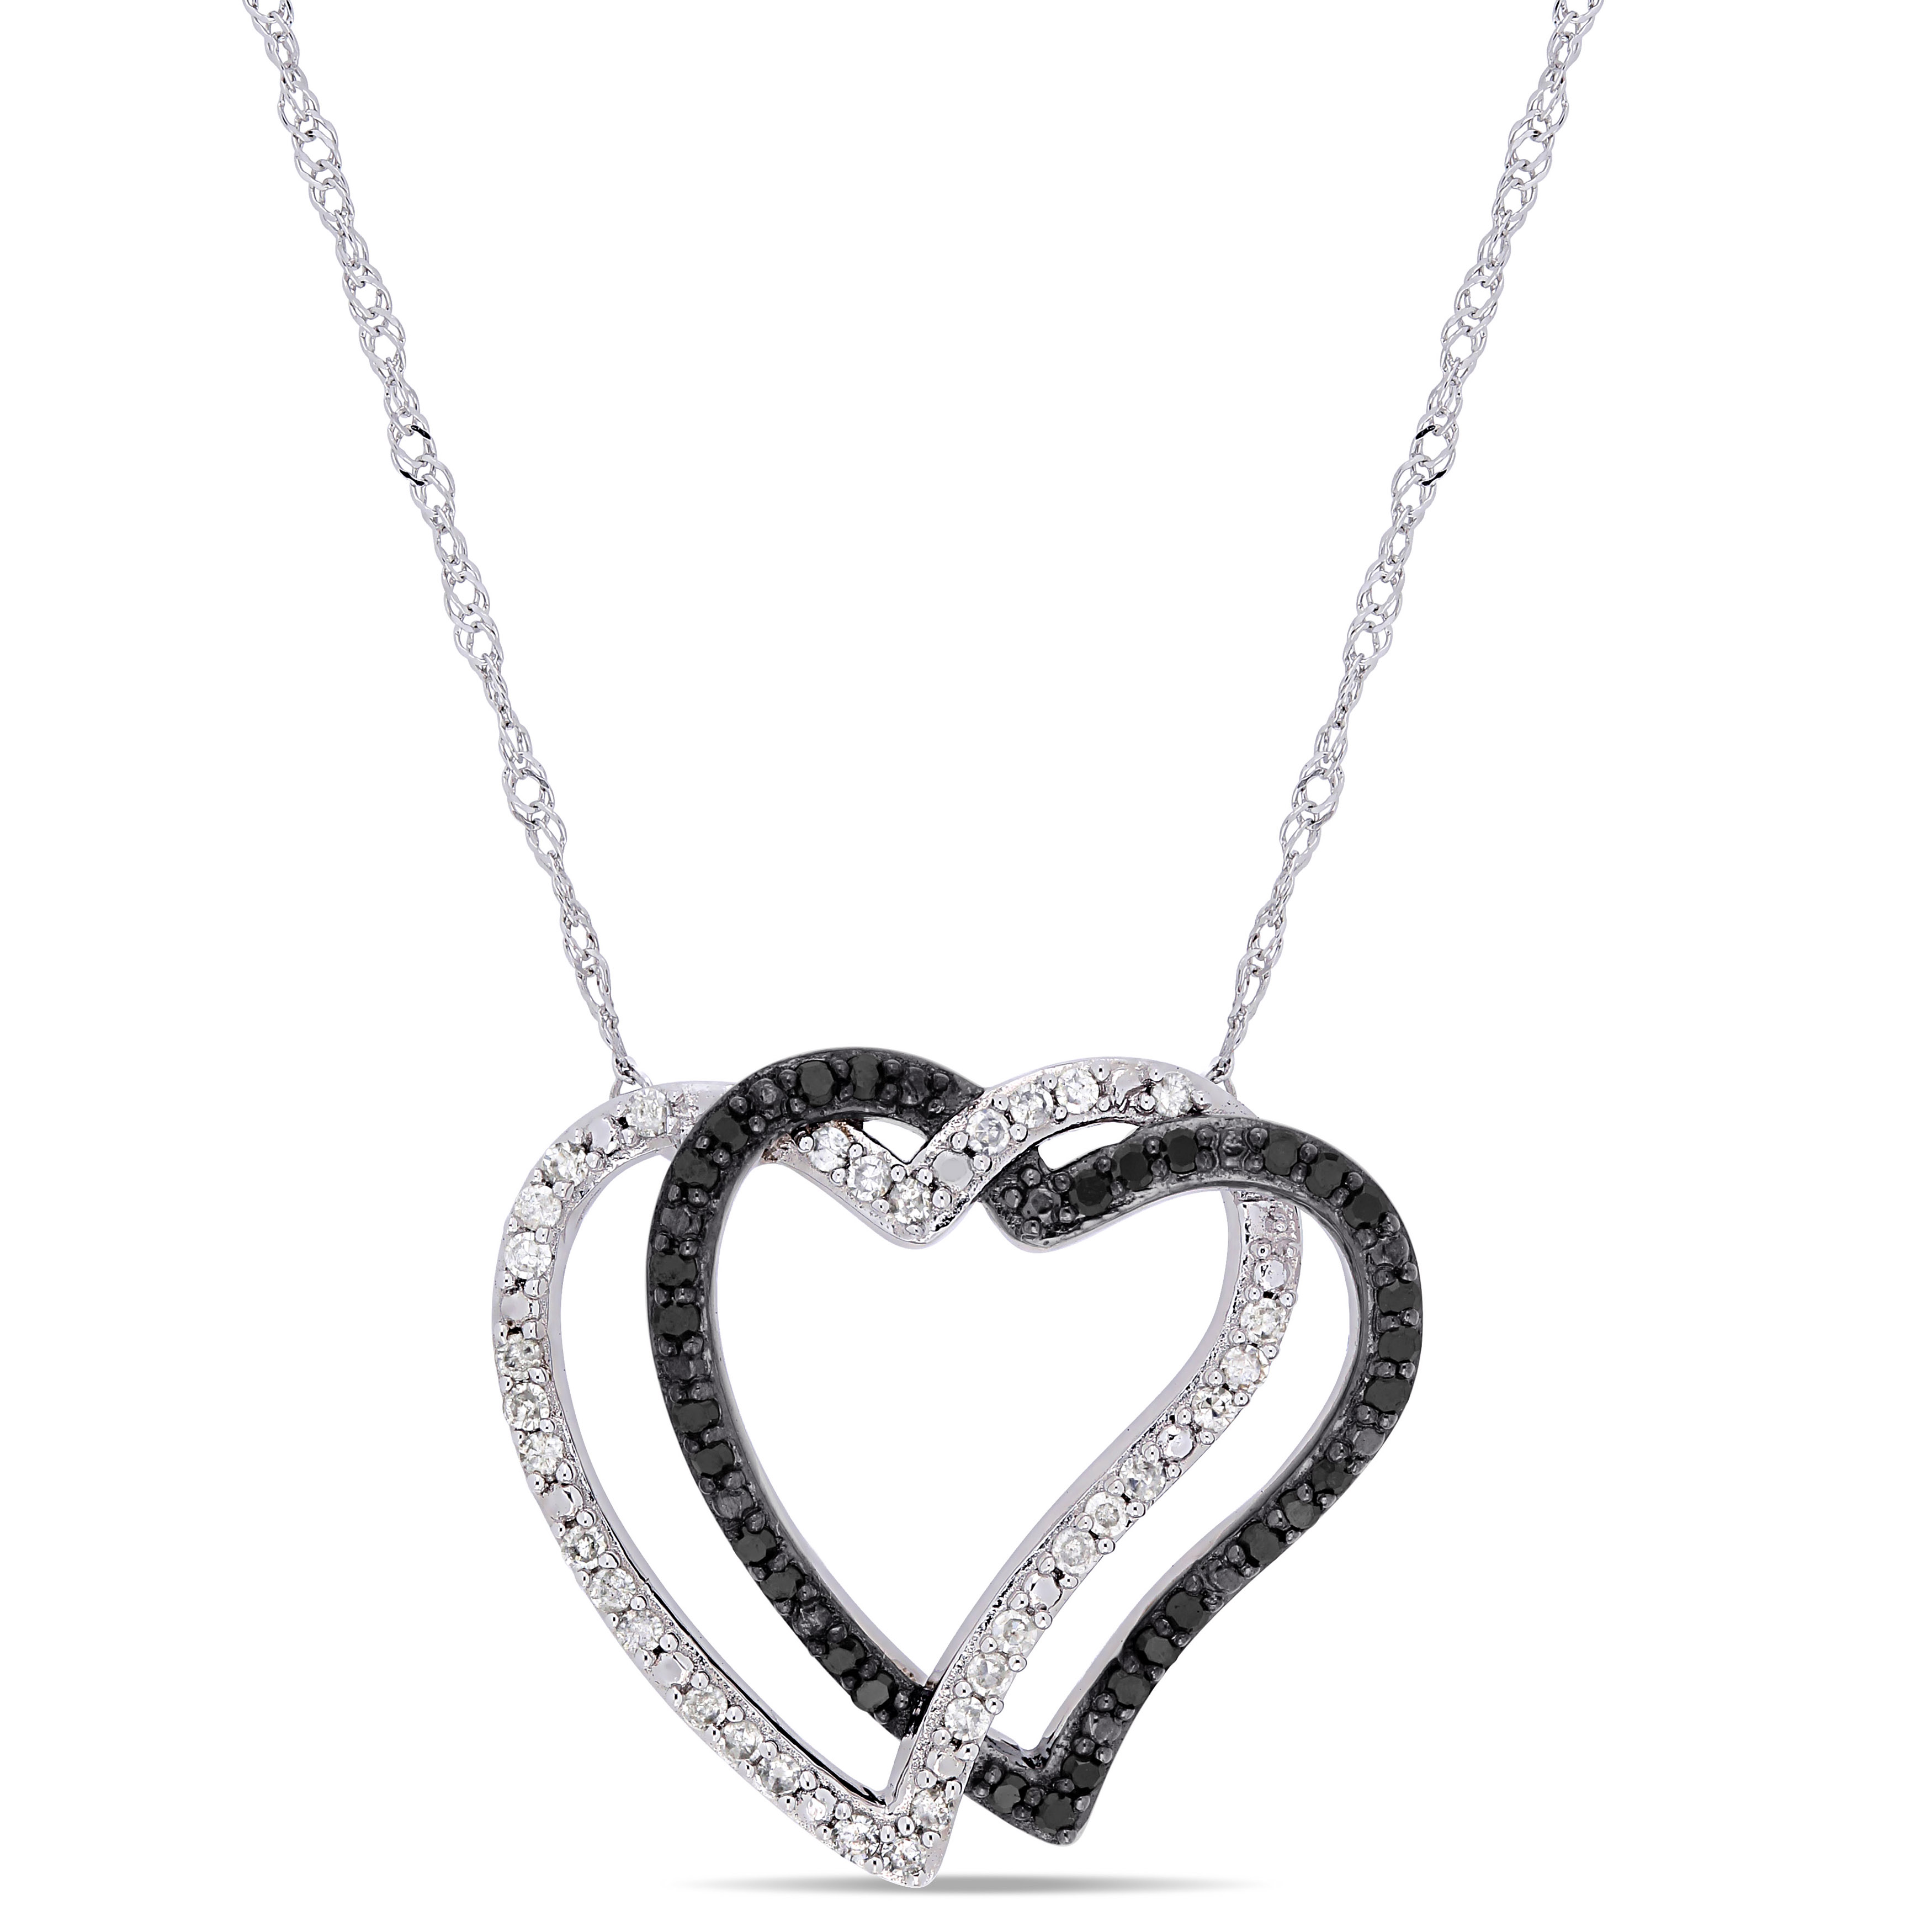 1/4 CT TW Black and White Diamond Double Open Heart Necklace in 10k White Gold with Black Rhodium Plating